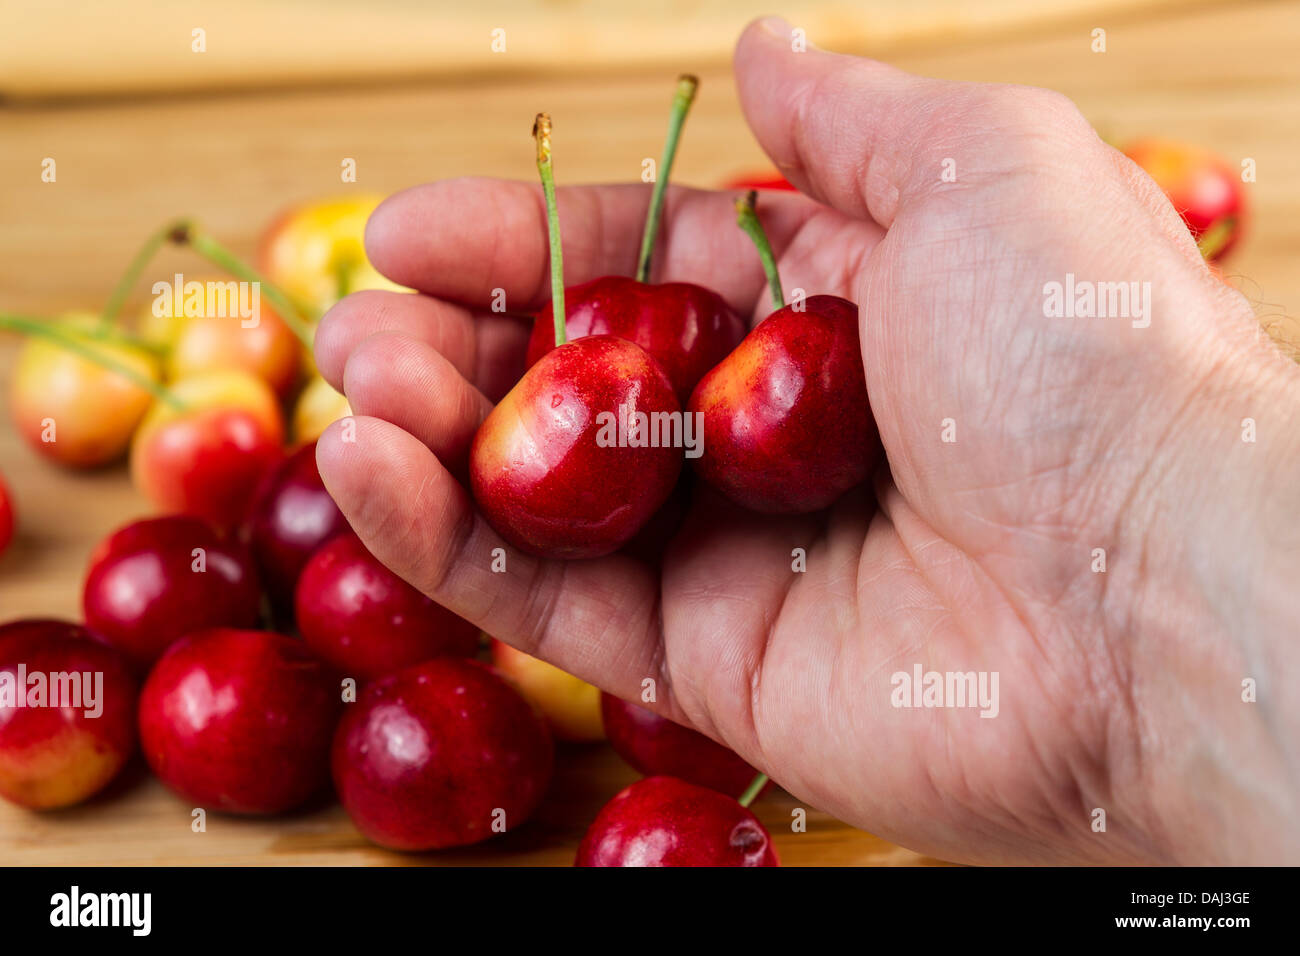 Closeup horizontal photo of male hand holding Rainier cherries with pile of cherries in background on bamboo board Stock Photo